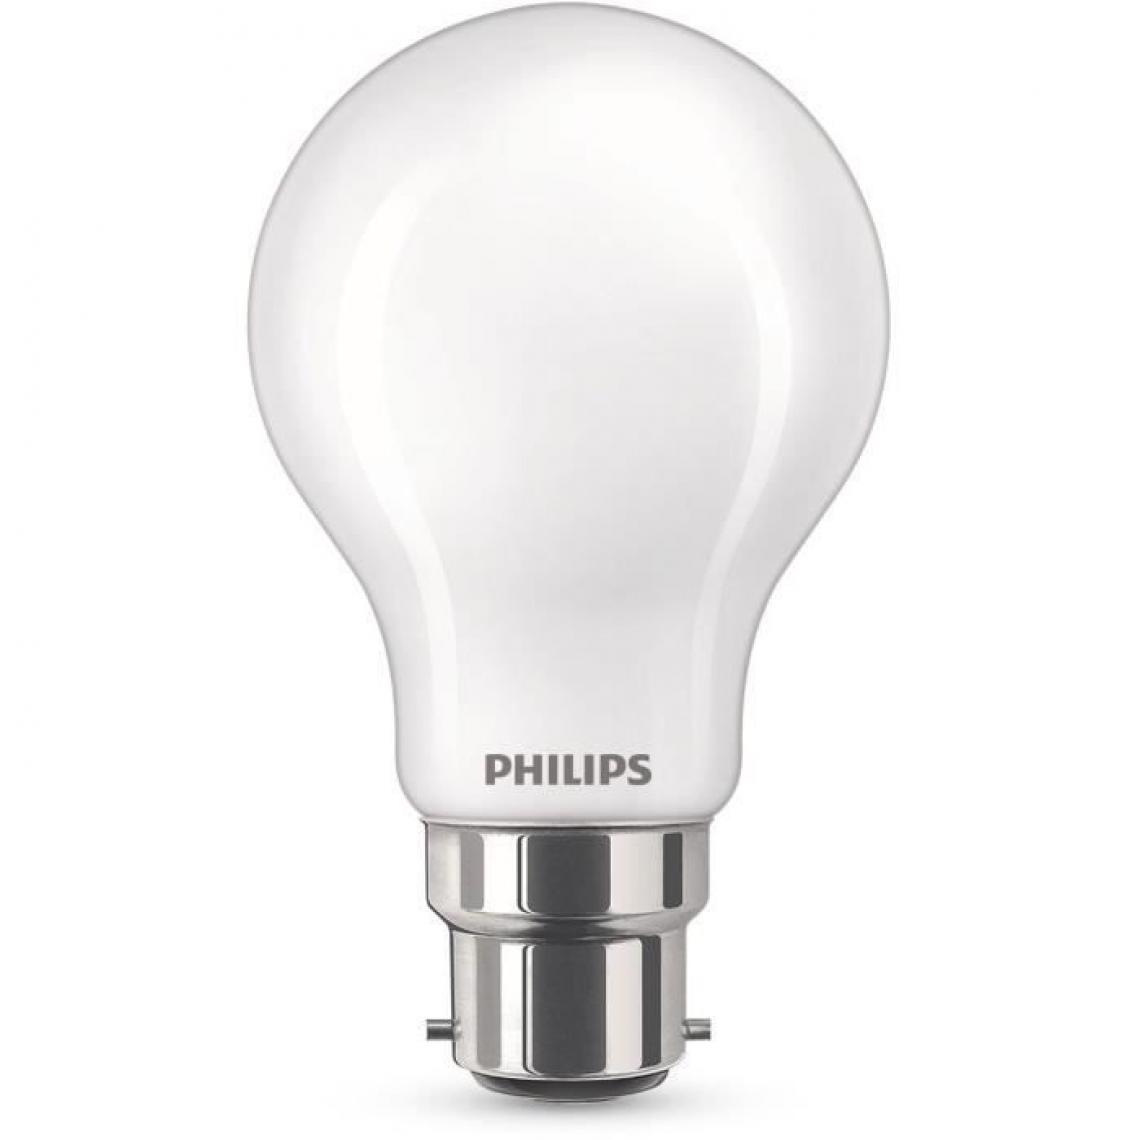 Philips - Philips ampoule LED Equivalent 100W B22 Blanc chaud non dimmable, verre - Ampoules LED